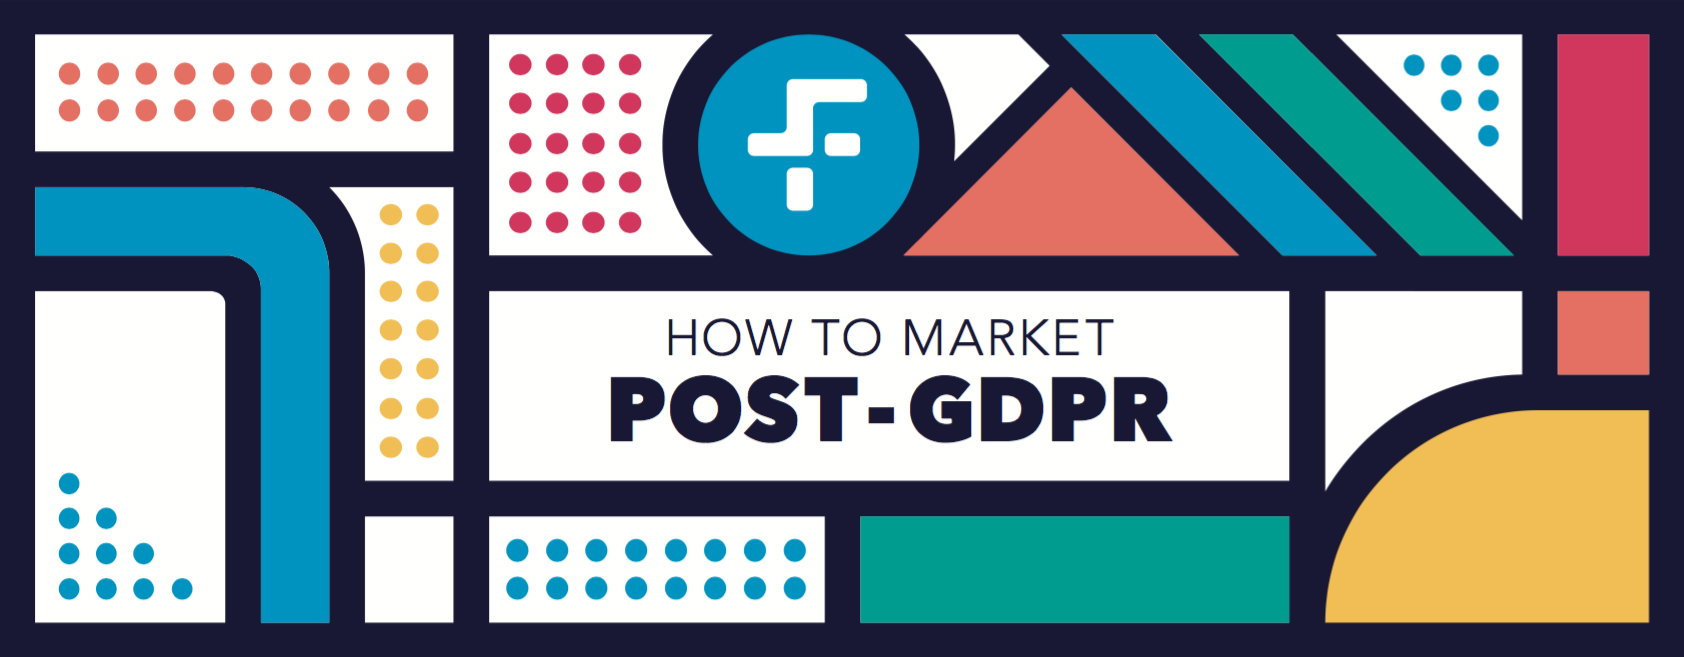 How to market post-GDPR